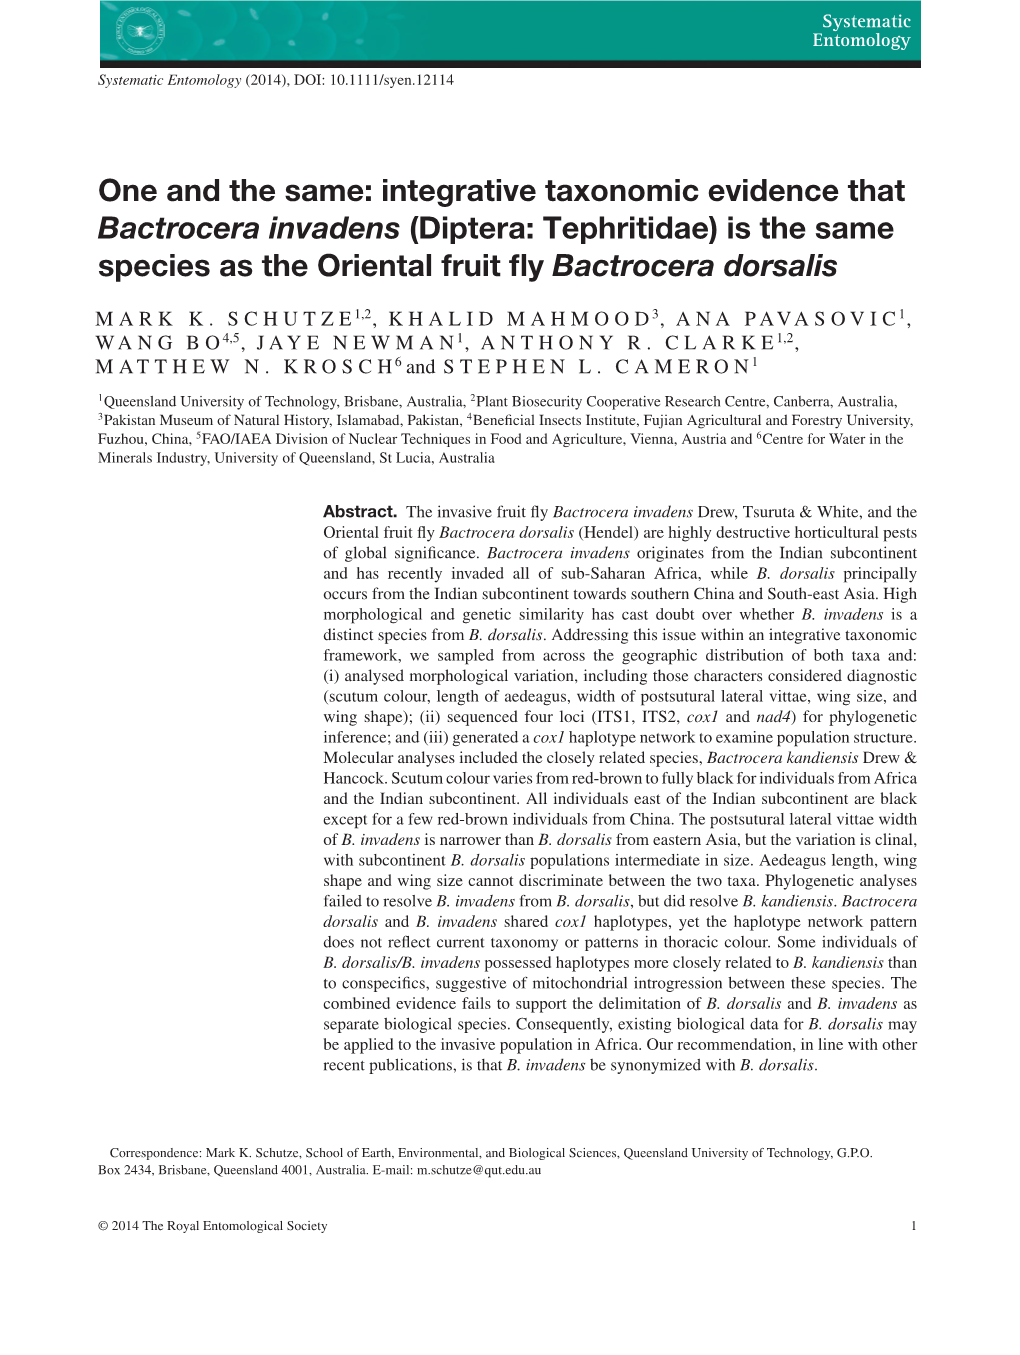 Integrative Taxonomic Evidence That Bactrocera Invadens (Diptera: Tephritidae) Is the Same Species As the Oriental Fruit ﬂy Bactrocera Dorsalis